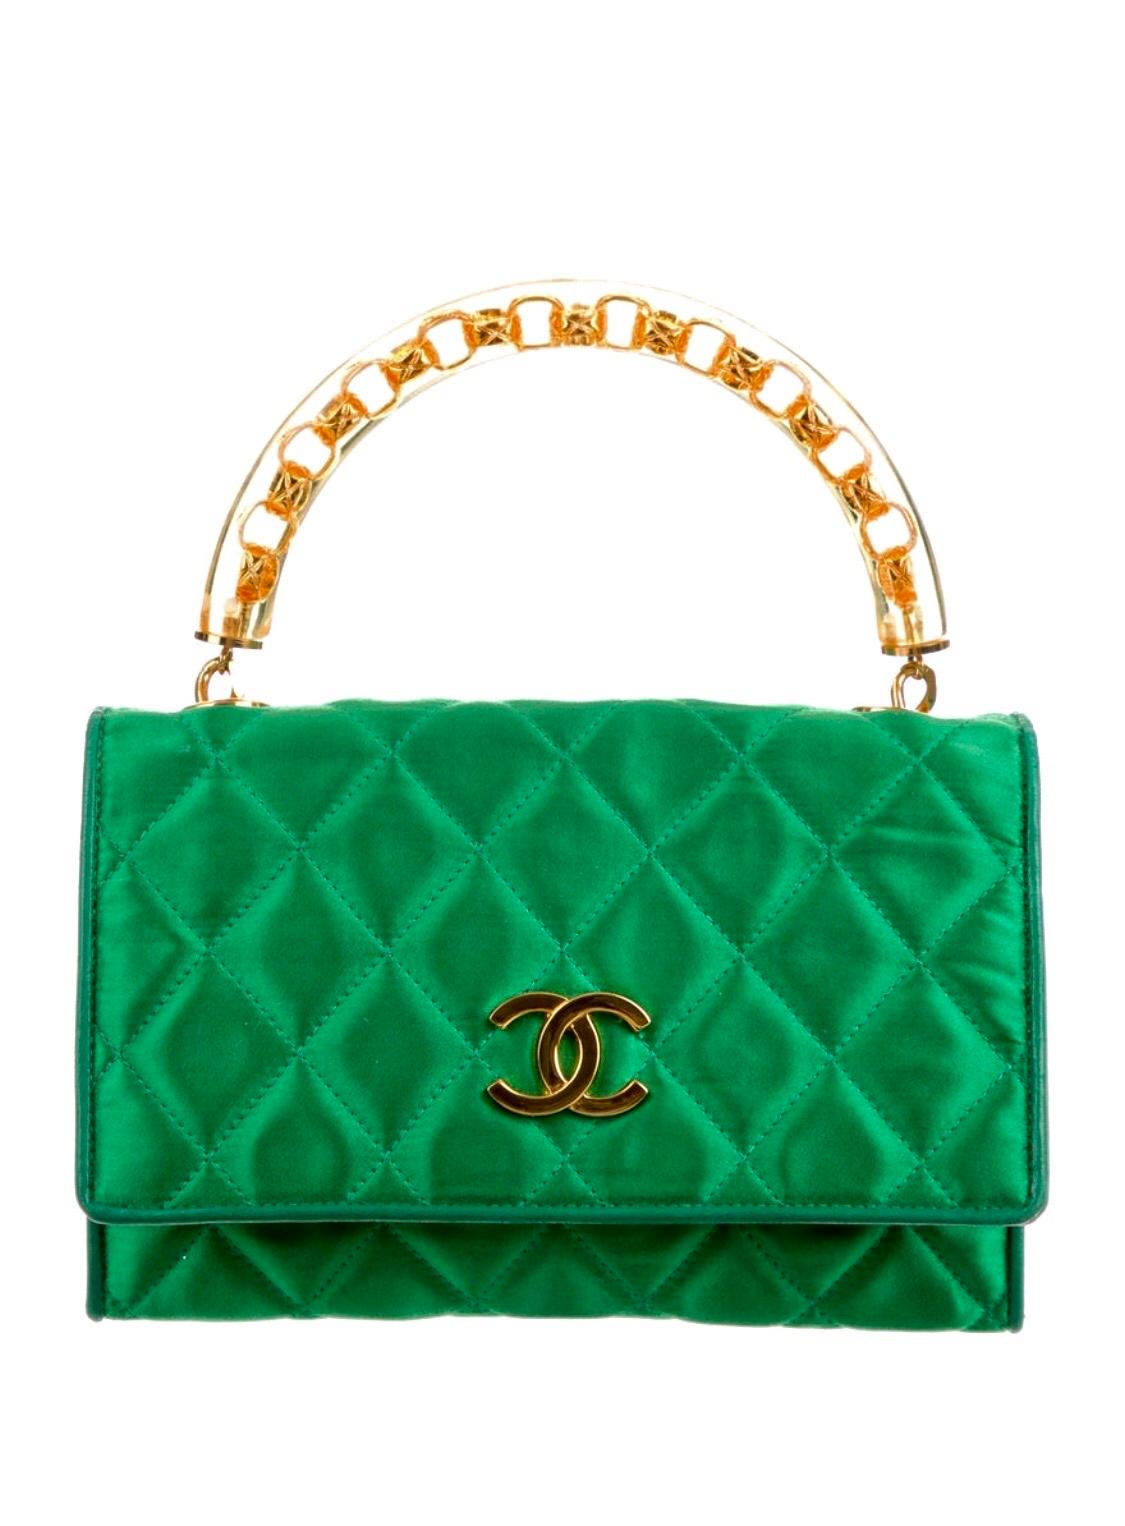 For decades, the Chanel handbag has been a symbol of status, modernity, and the effortless blend of too little and too much. In the 80s, Karl Lagerfeld revived the quilted flap-bag style Chanel bag and added the iconic CC logo to the front.